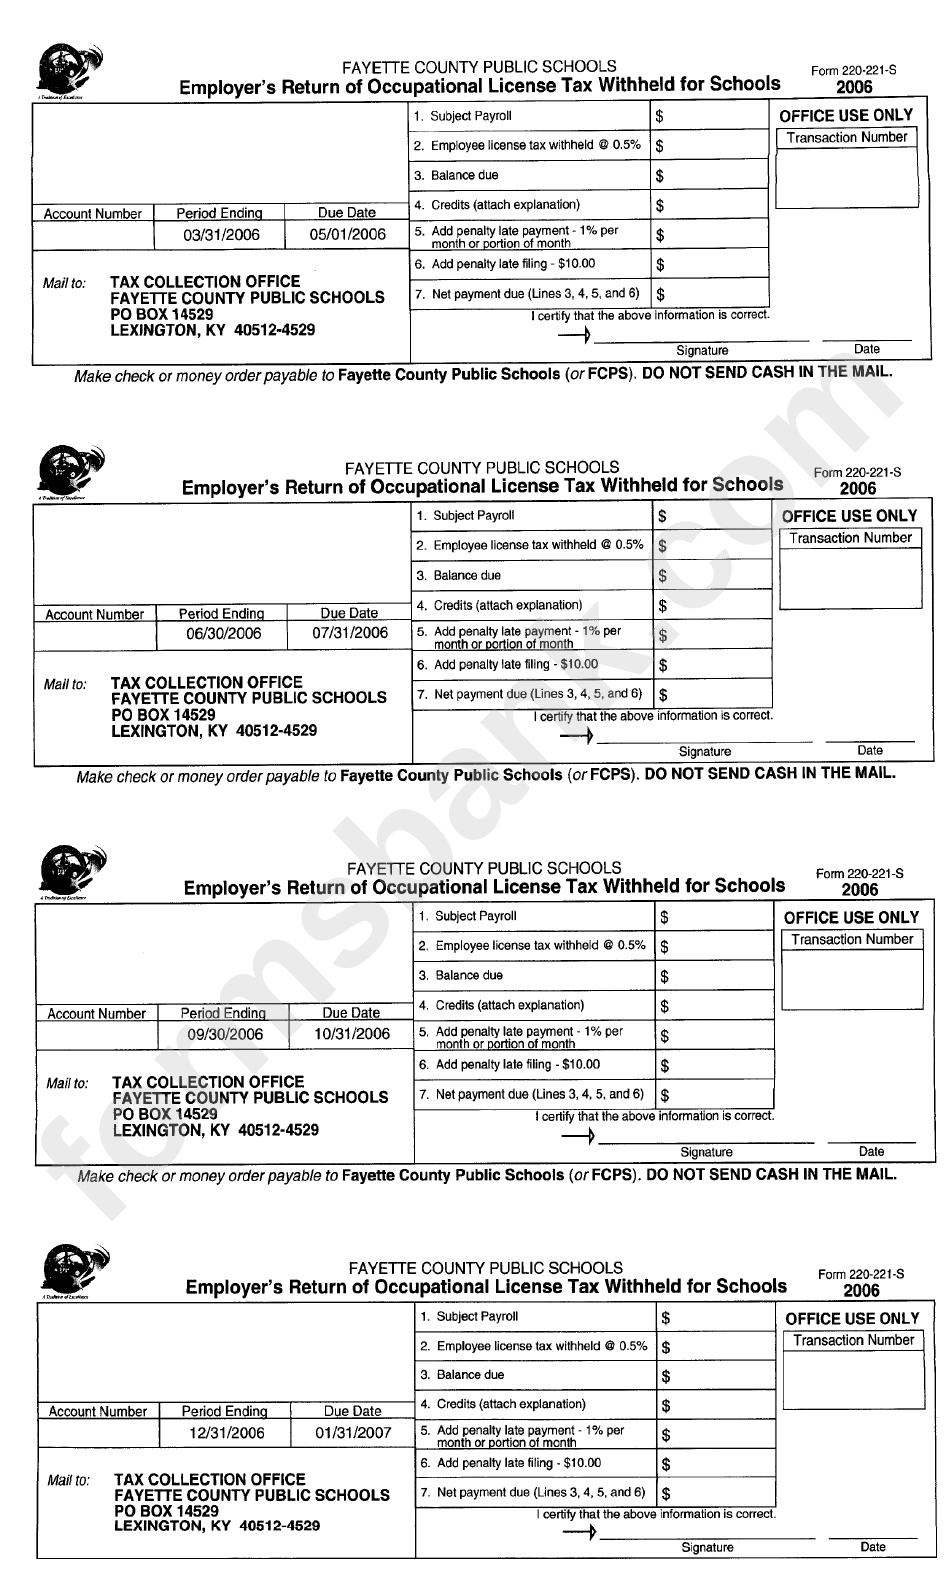 Form 220-221-S - Employer